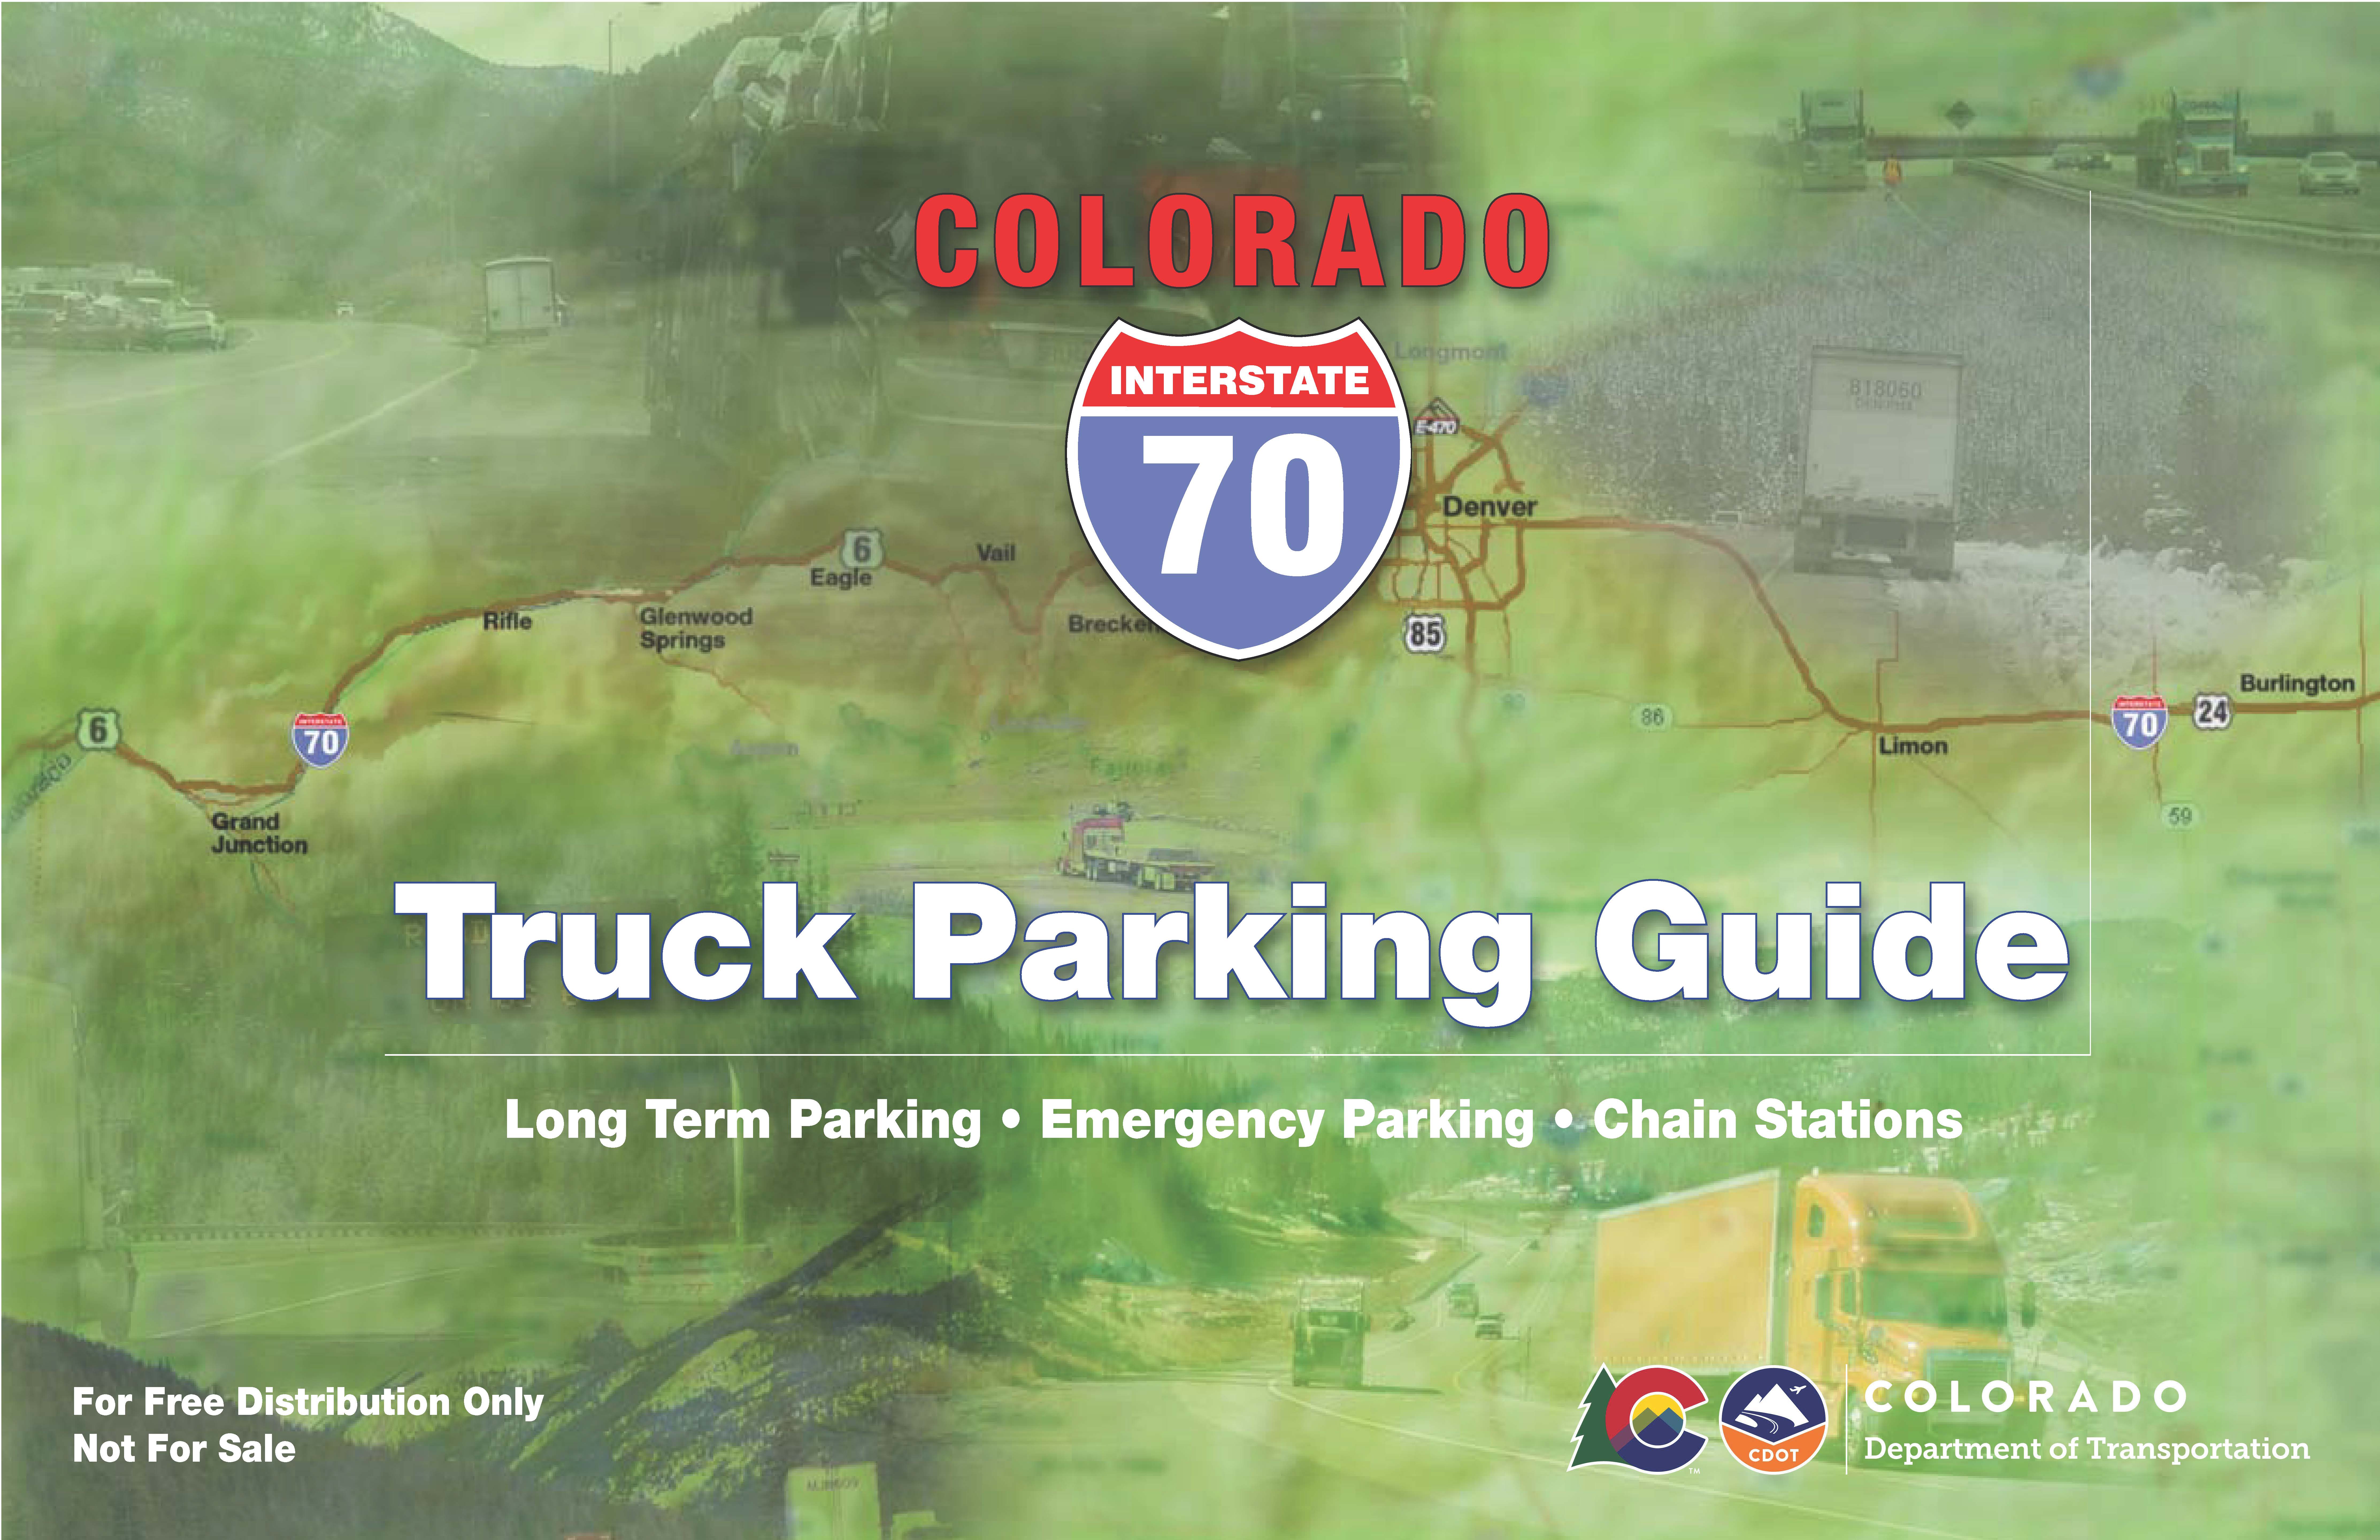 Truck Parking Guide detail image